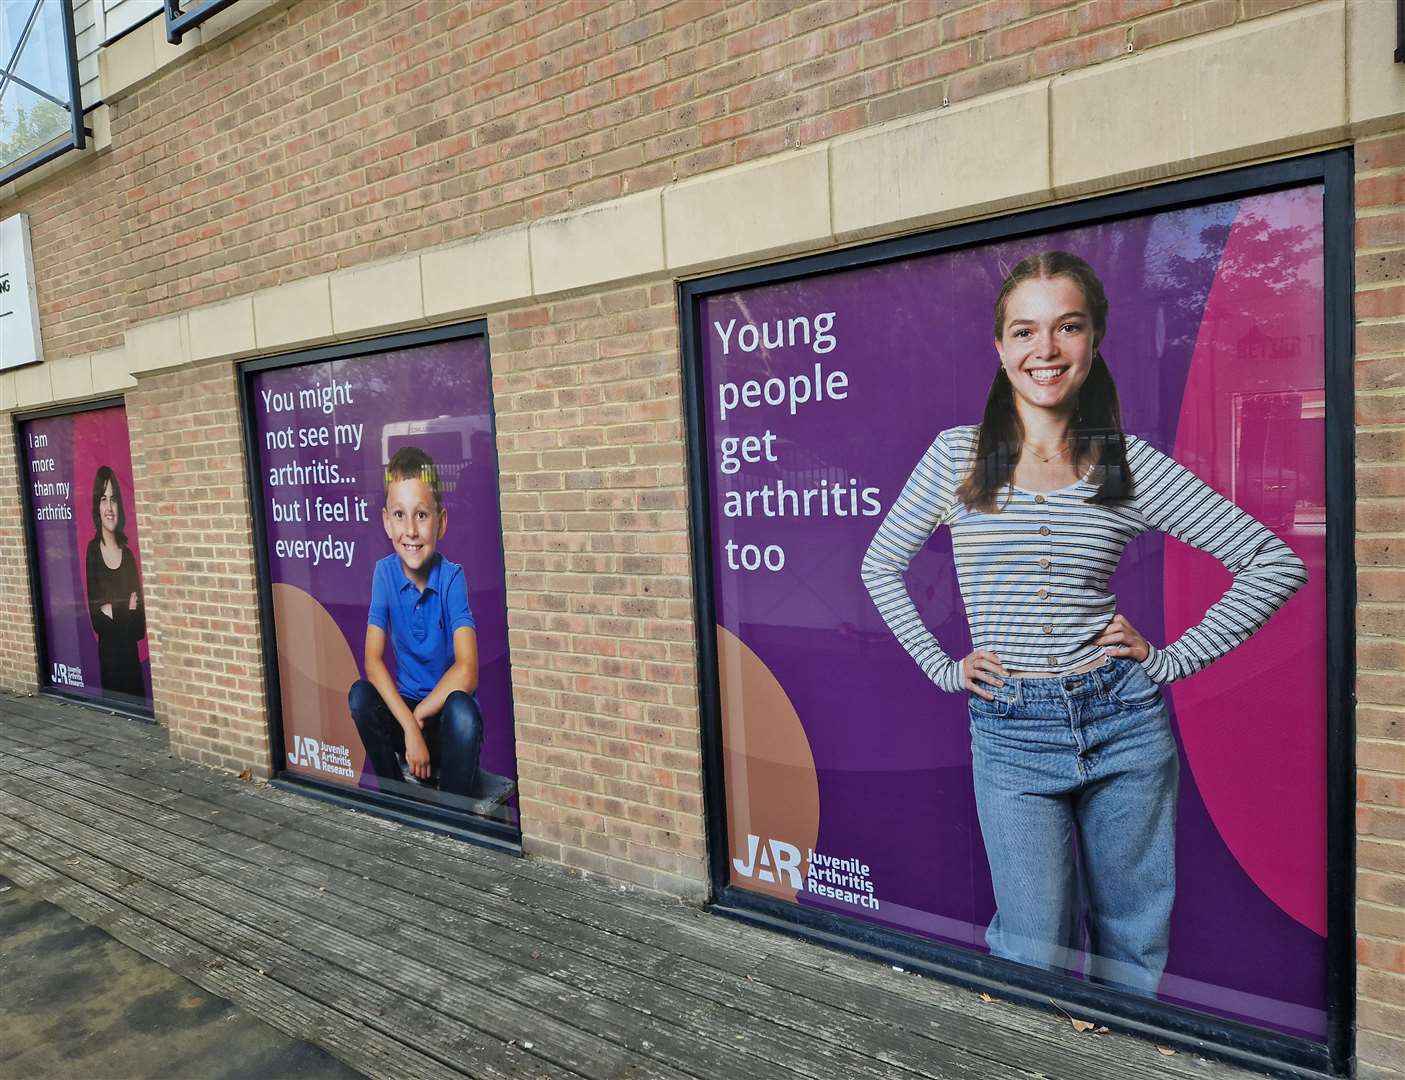 New window signage featuring local children, young people and families from the local area has been installed with thought-provoking imagery